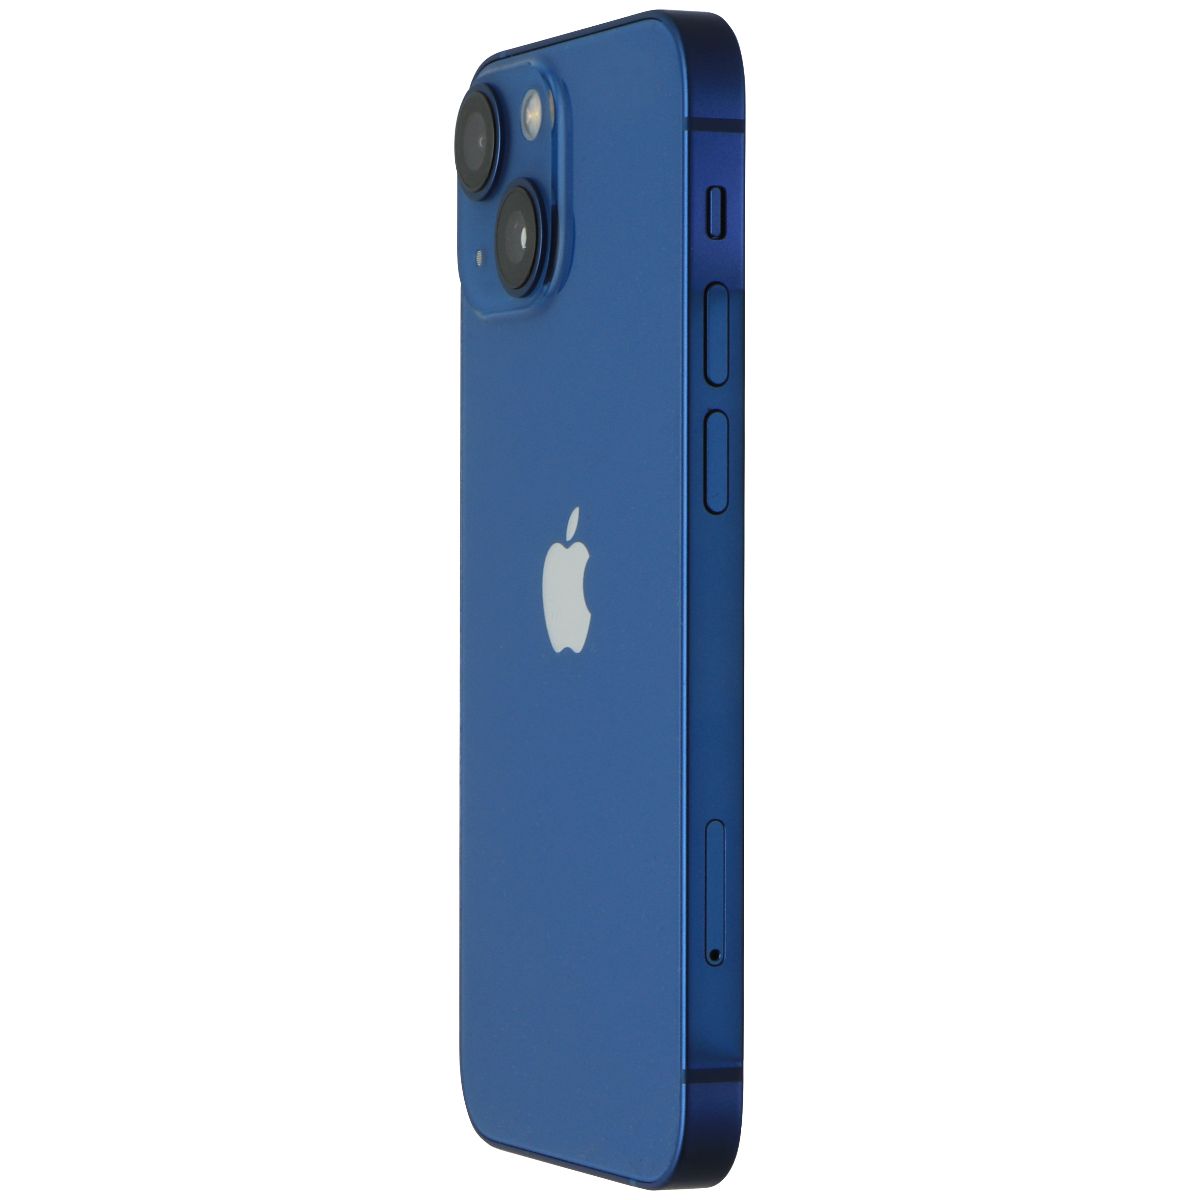 Apple iPhone 13 mini (5.4-inch) Smartphone (A2481) Verizon Only - 128GB/Blue Cell Phones & Smartphones Apple    - Simple Cell Bulk Wholesale Pricing - USA Seller